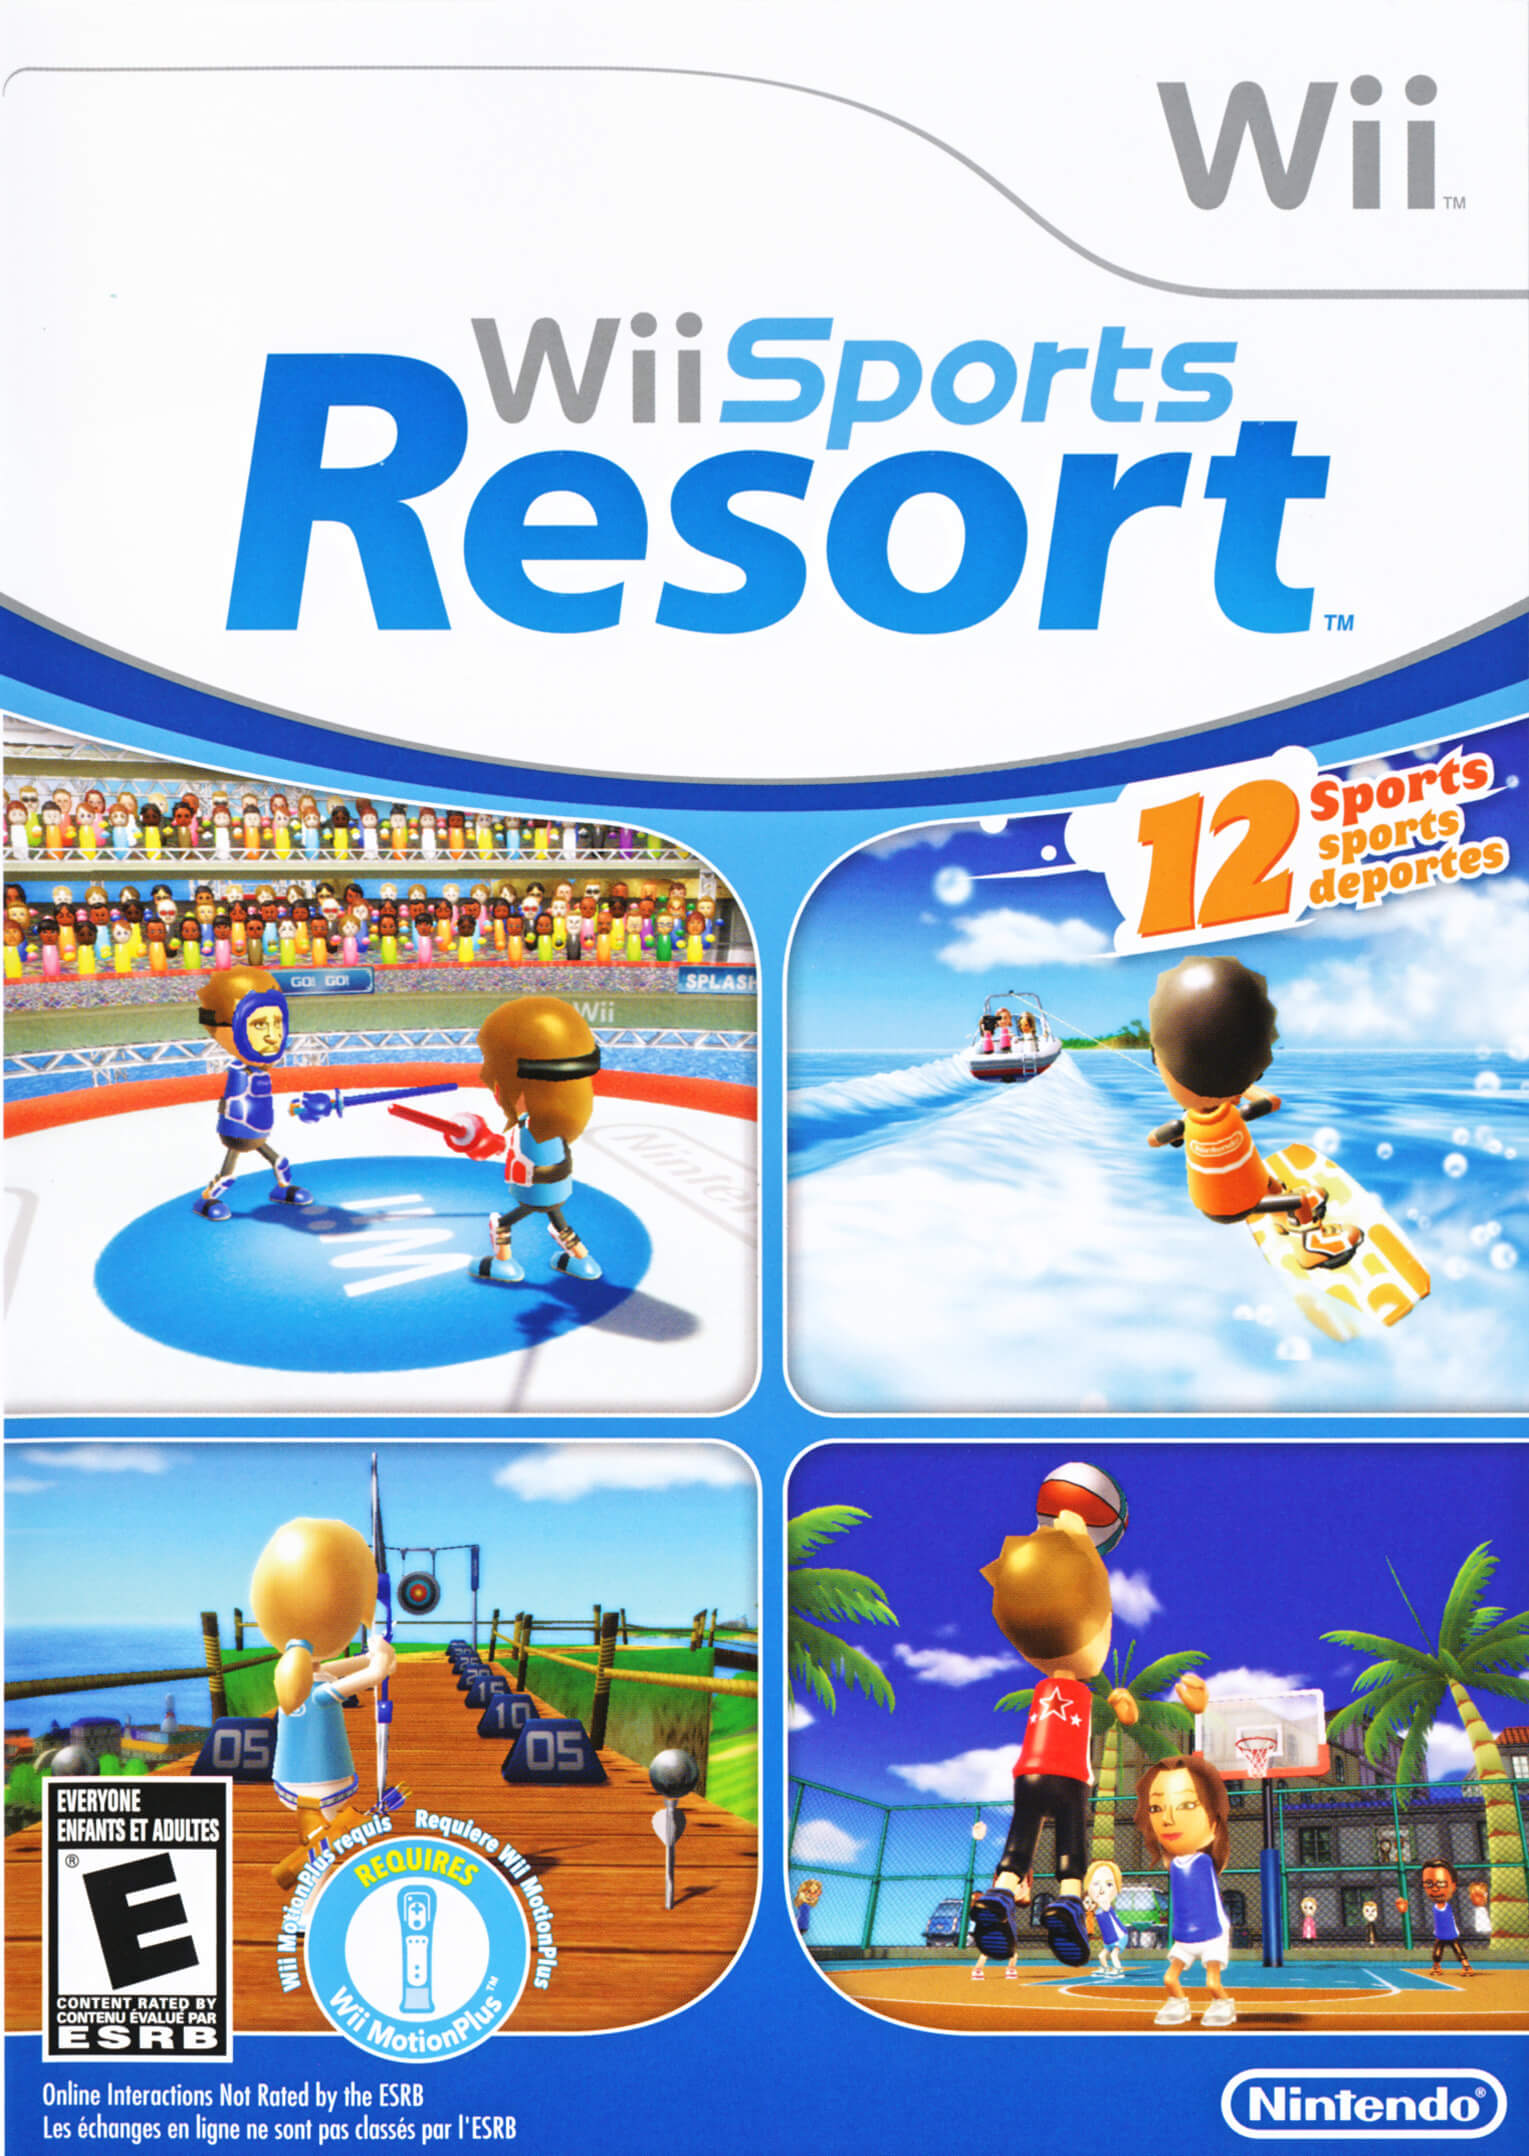 essay auditie lading Wii Sports Resort - Wii Game ROM - Nkit & WBFS Download